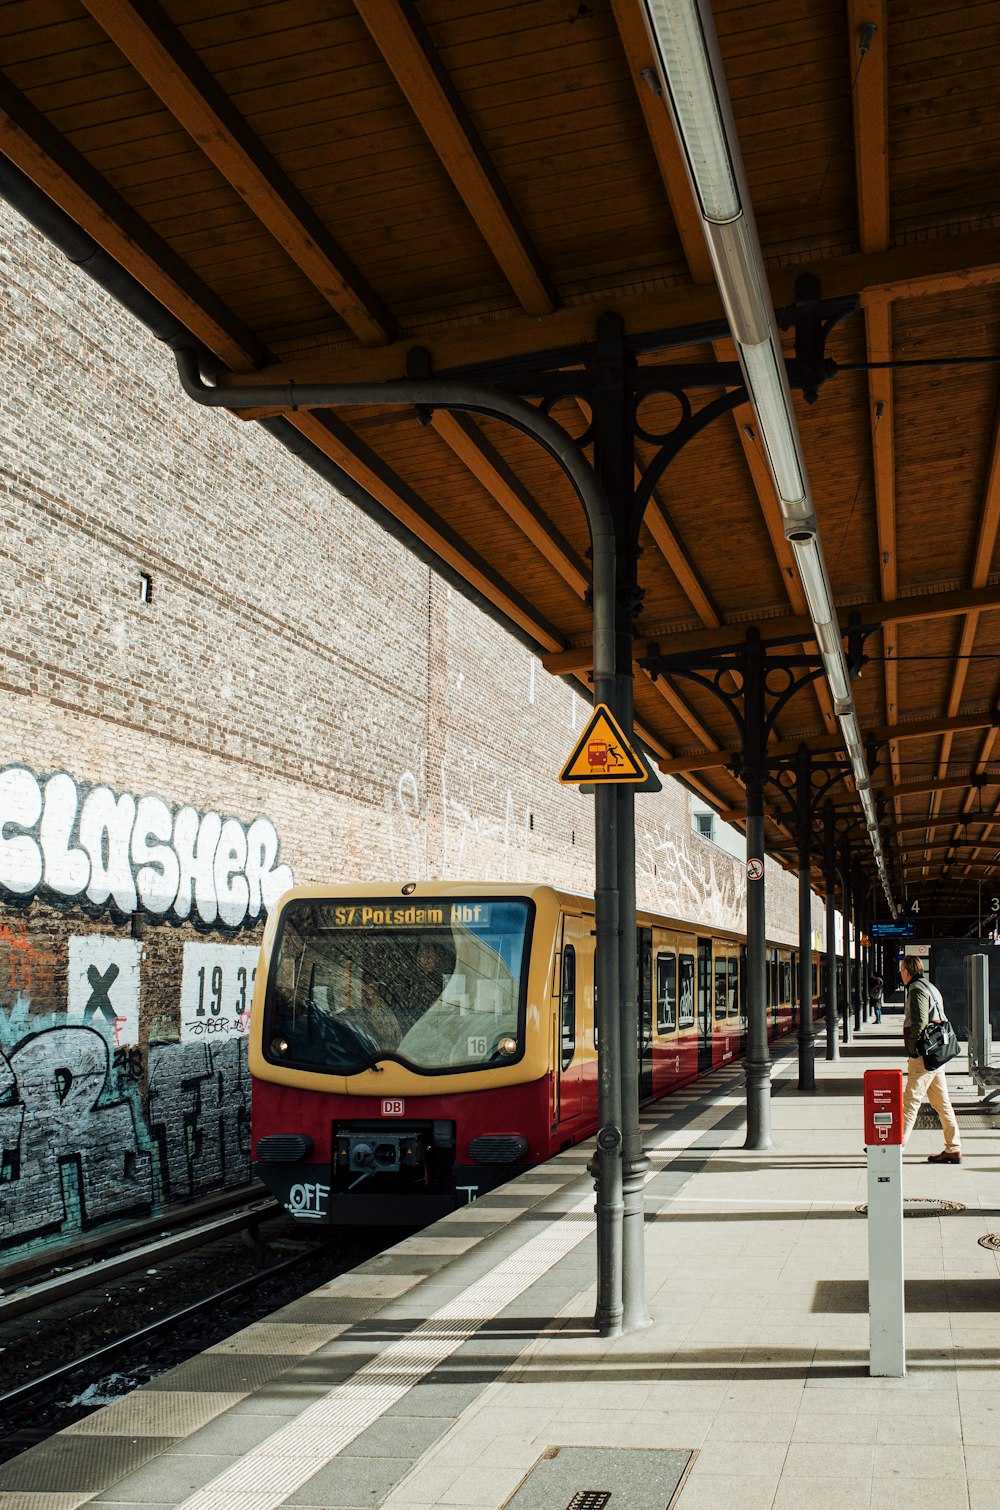 a train pulling into a train station covered in graffiti